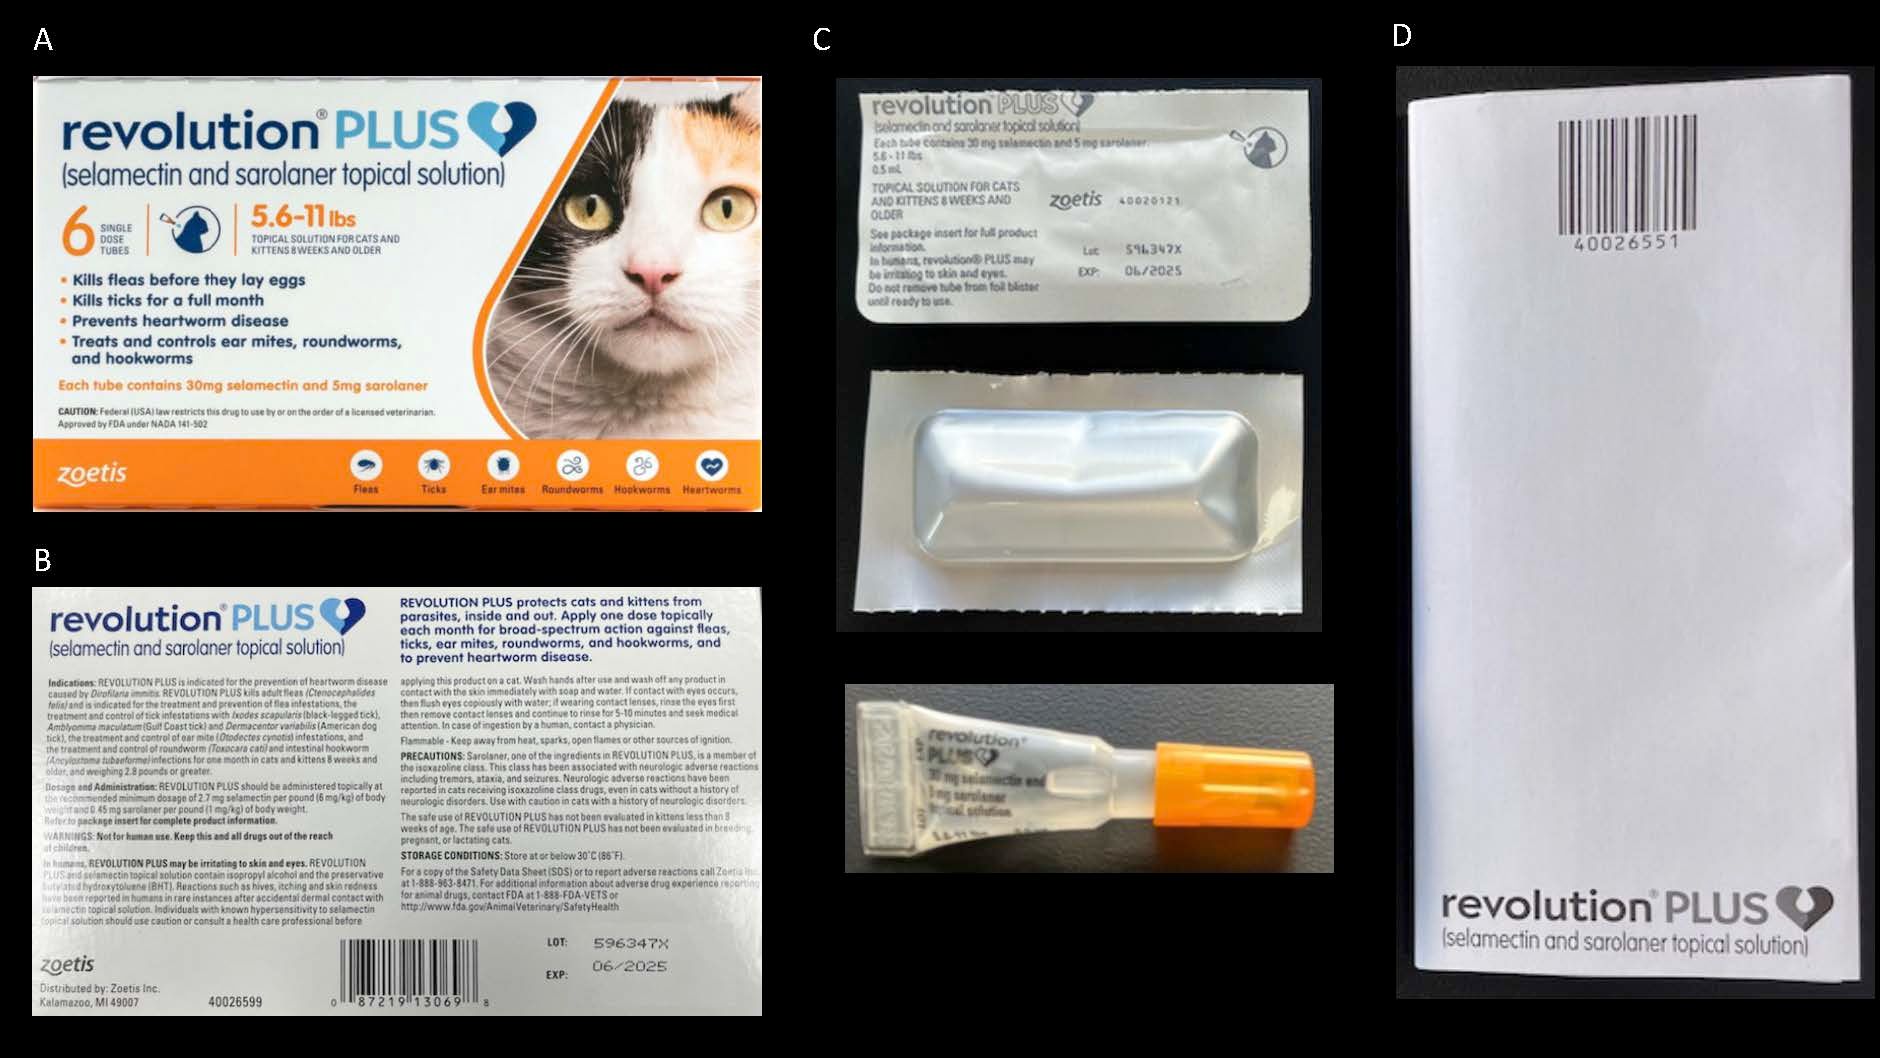 An example of a topical pesticide used for pest management on cats. A) The front cover of a topical pesticide for cats. This is where to look to ensure the product is for your pet’s species and determine that the product is safe to use for animals of your pet’s weight. B) The back cover of a pesticide for cats. Information on product use, storage, and first aid are covered here. C) The individual doses of a pesticide for cats. D) The full labeling for the product which was included on a document inside the box. 